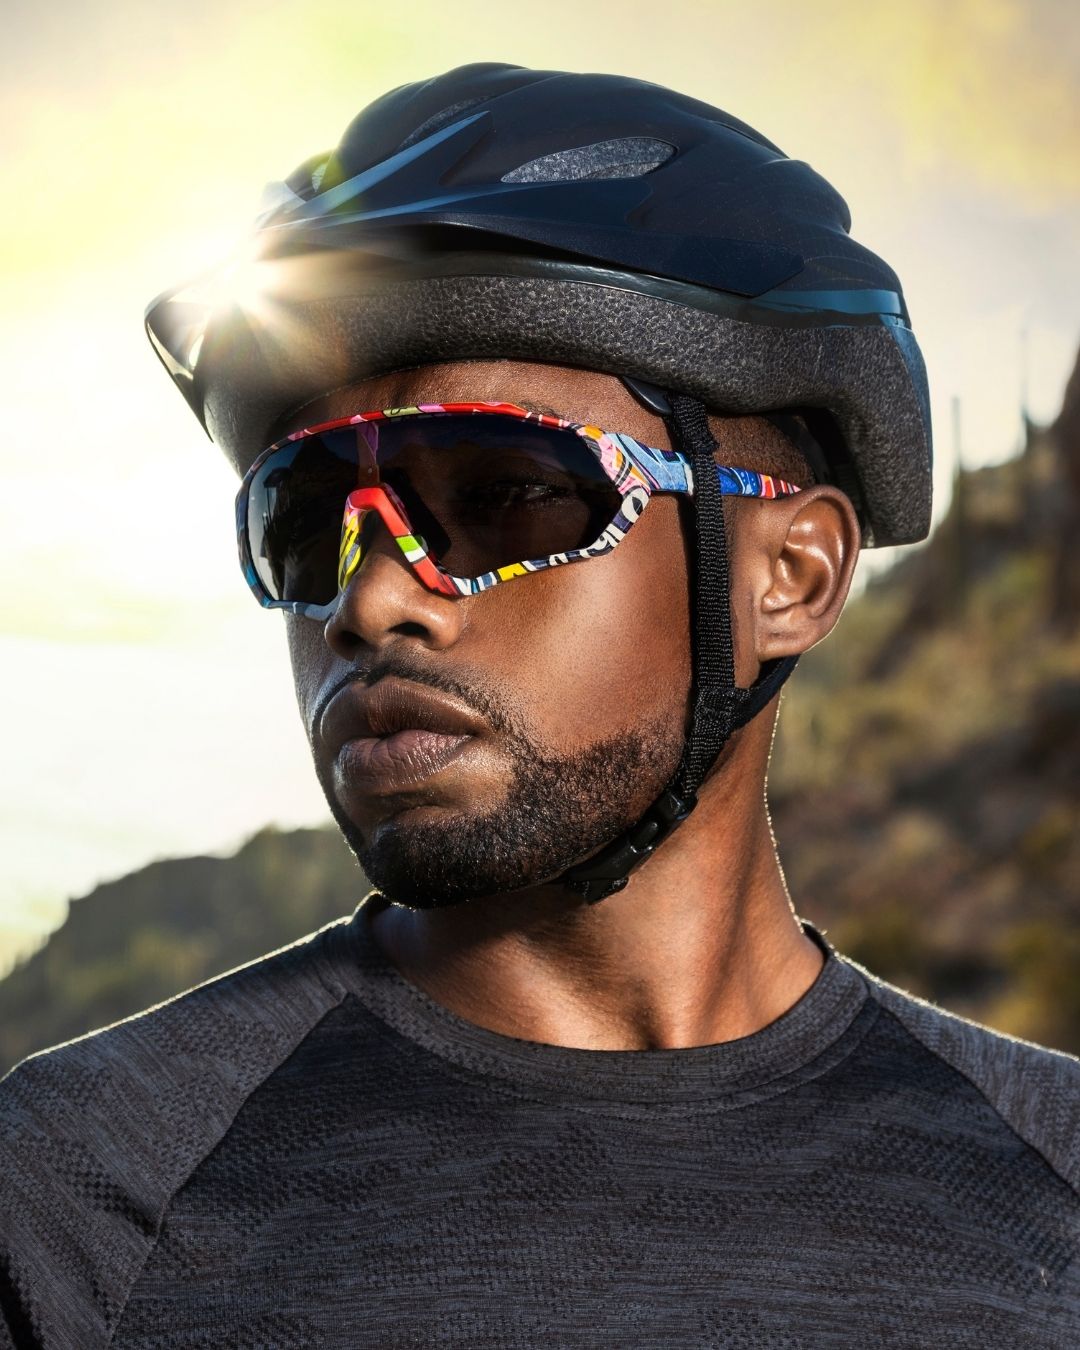 Male rider with Sunreact cycling glasses